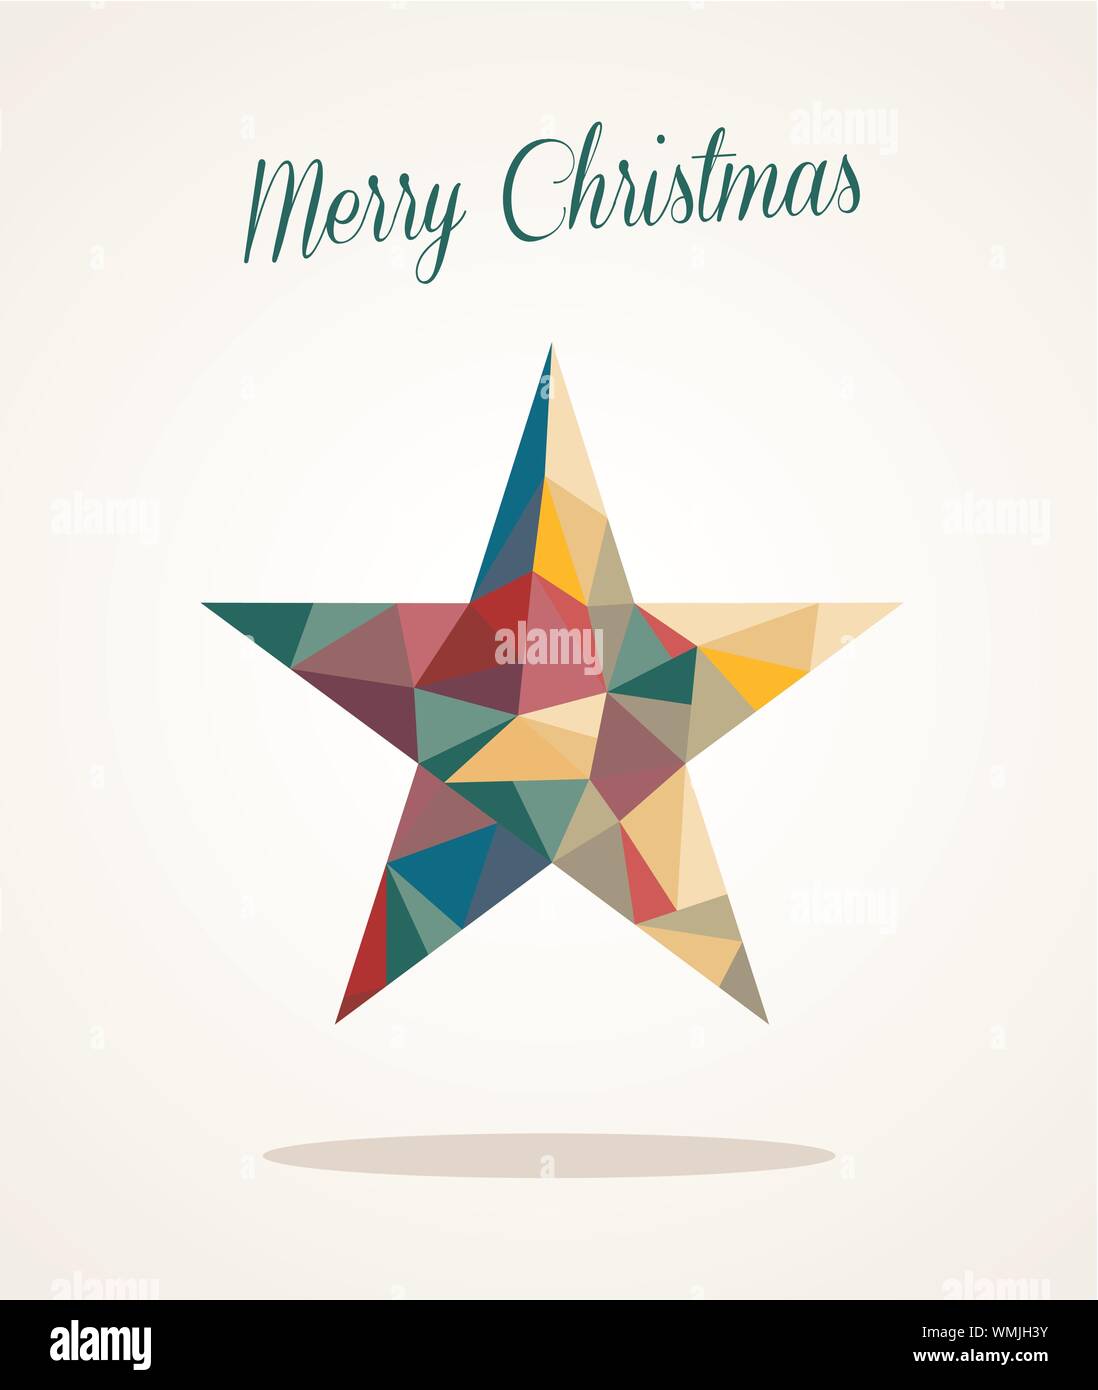 Merry Christmas contemporary triangle star greeting card Stock Vector